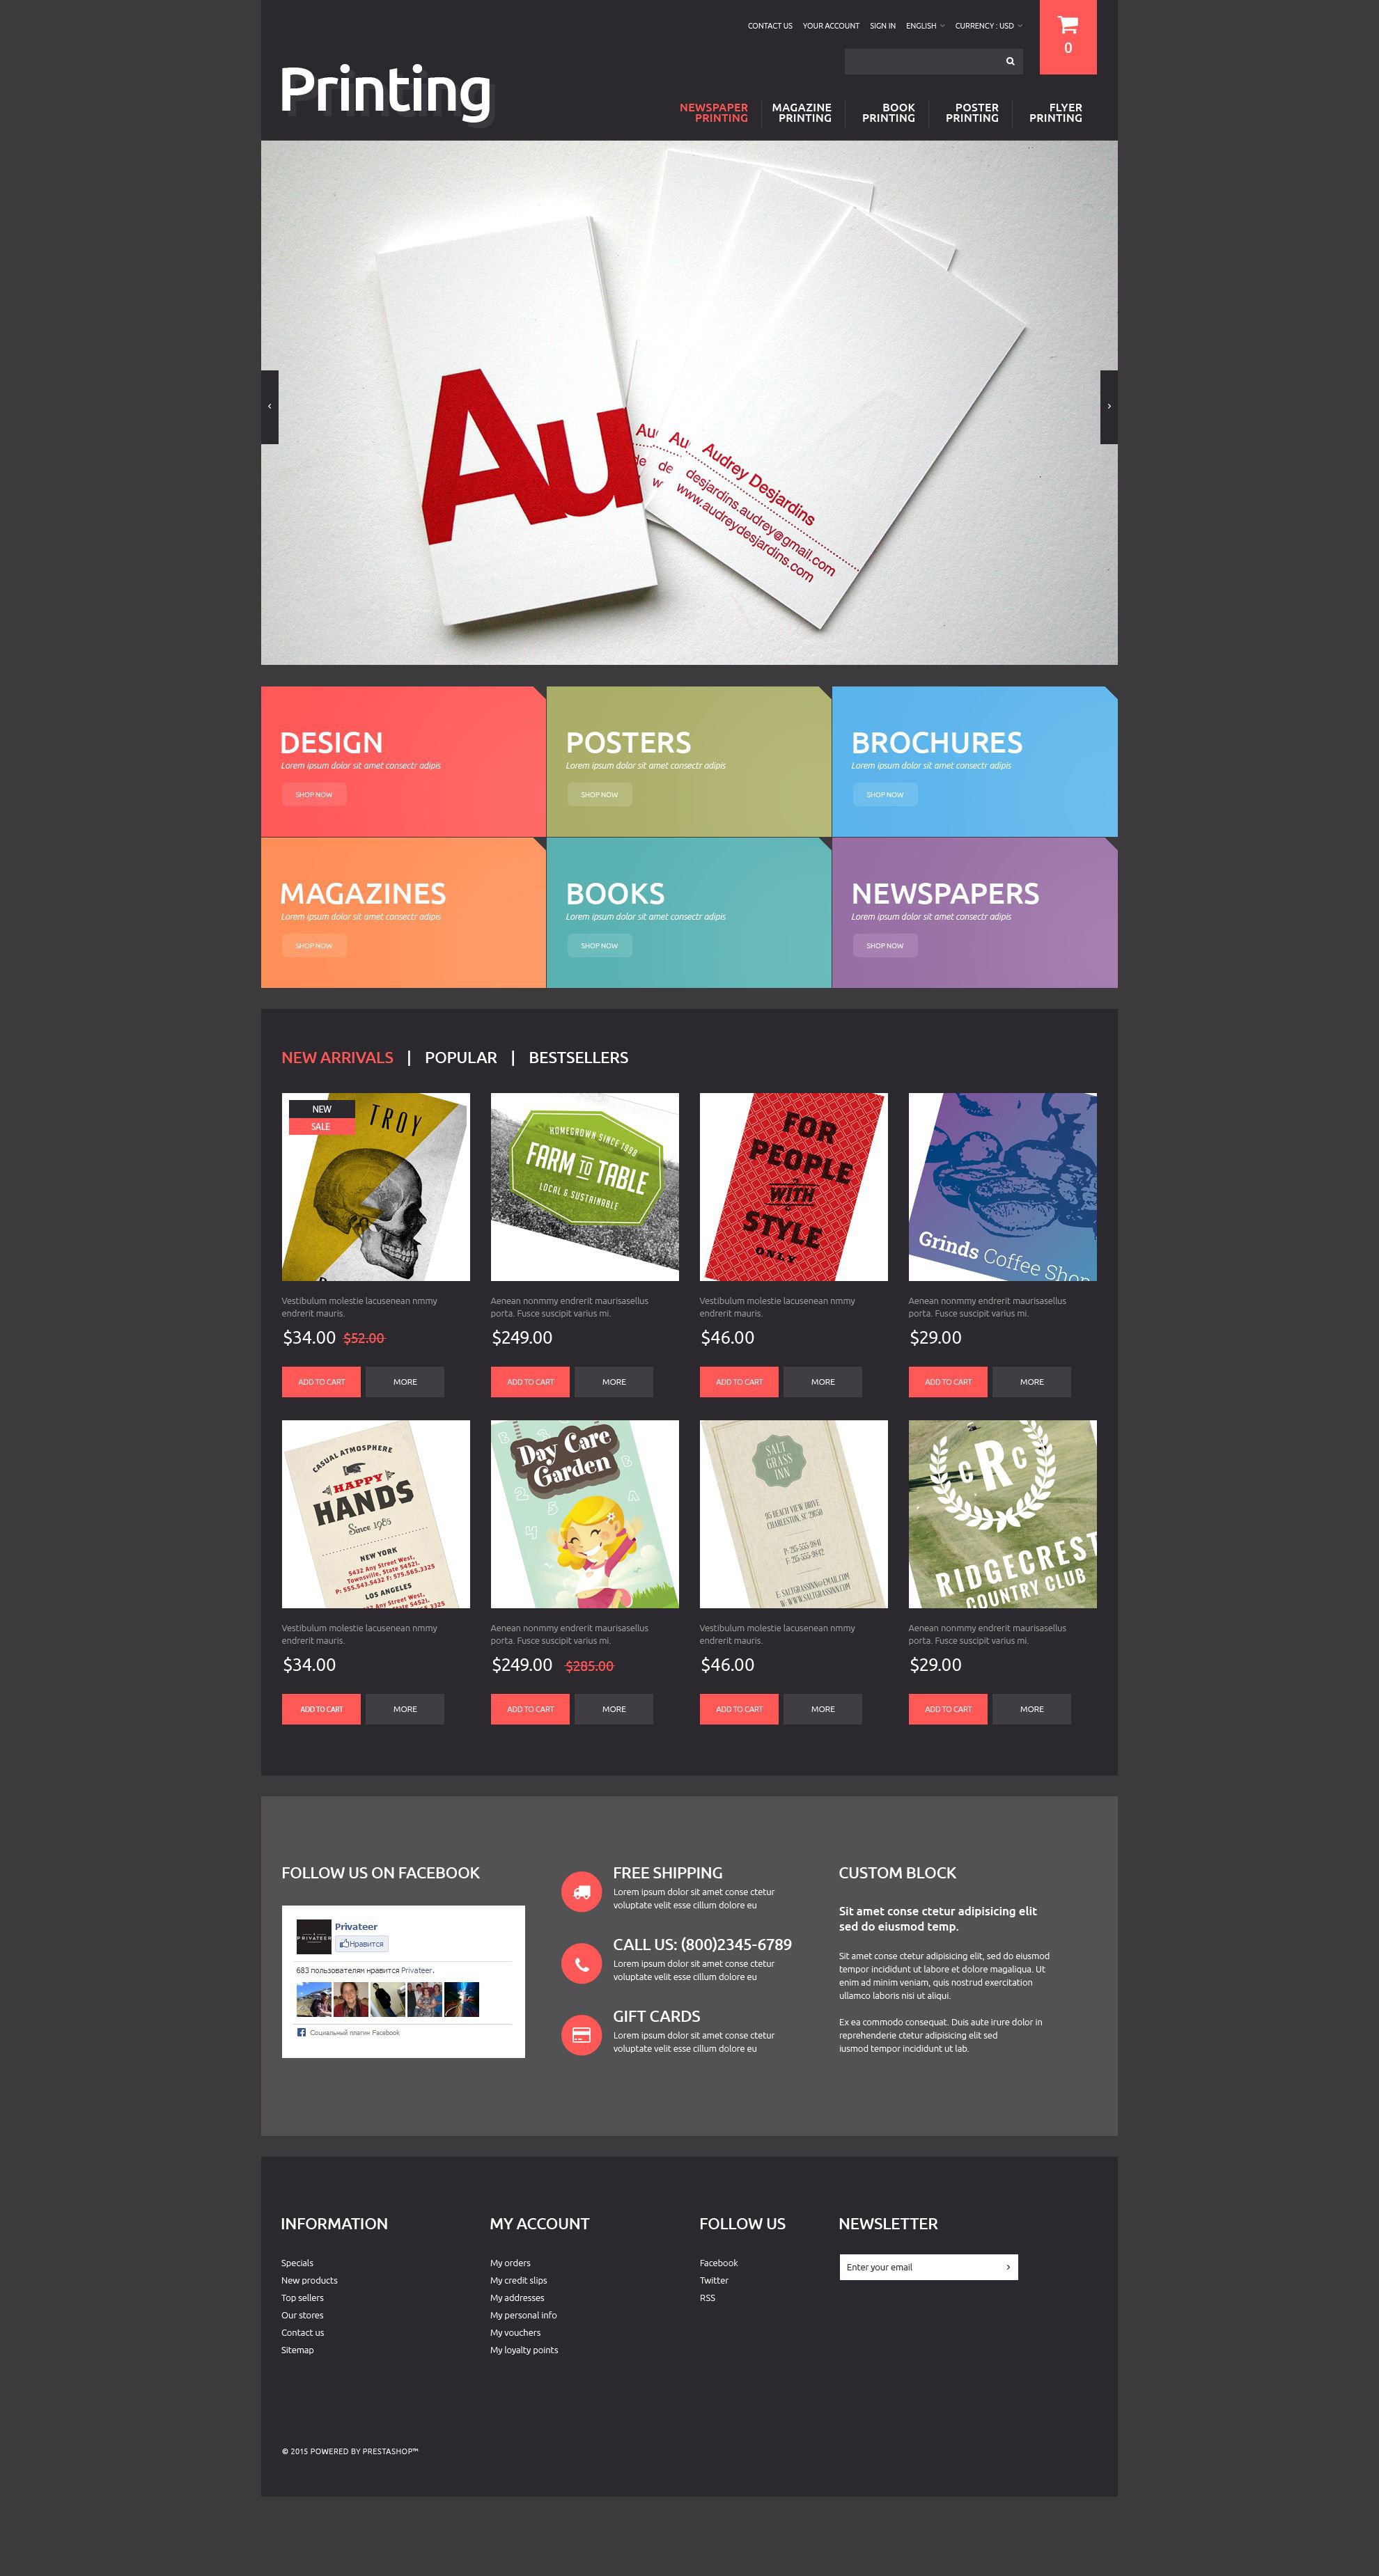 Printing Company Website Template : Free download the biggest